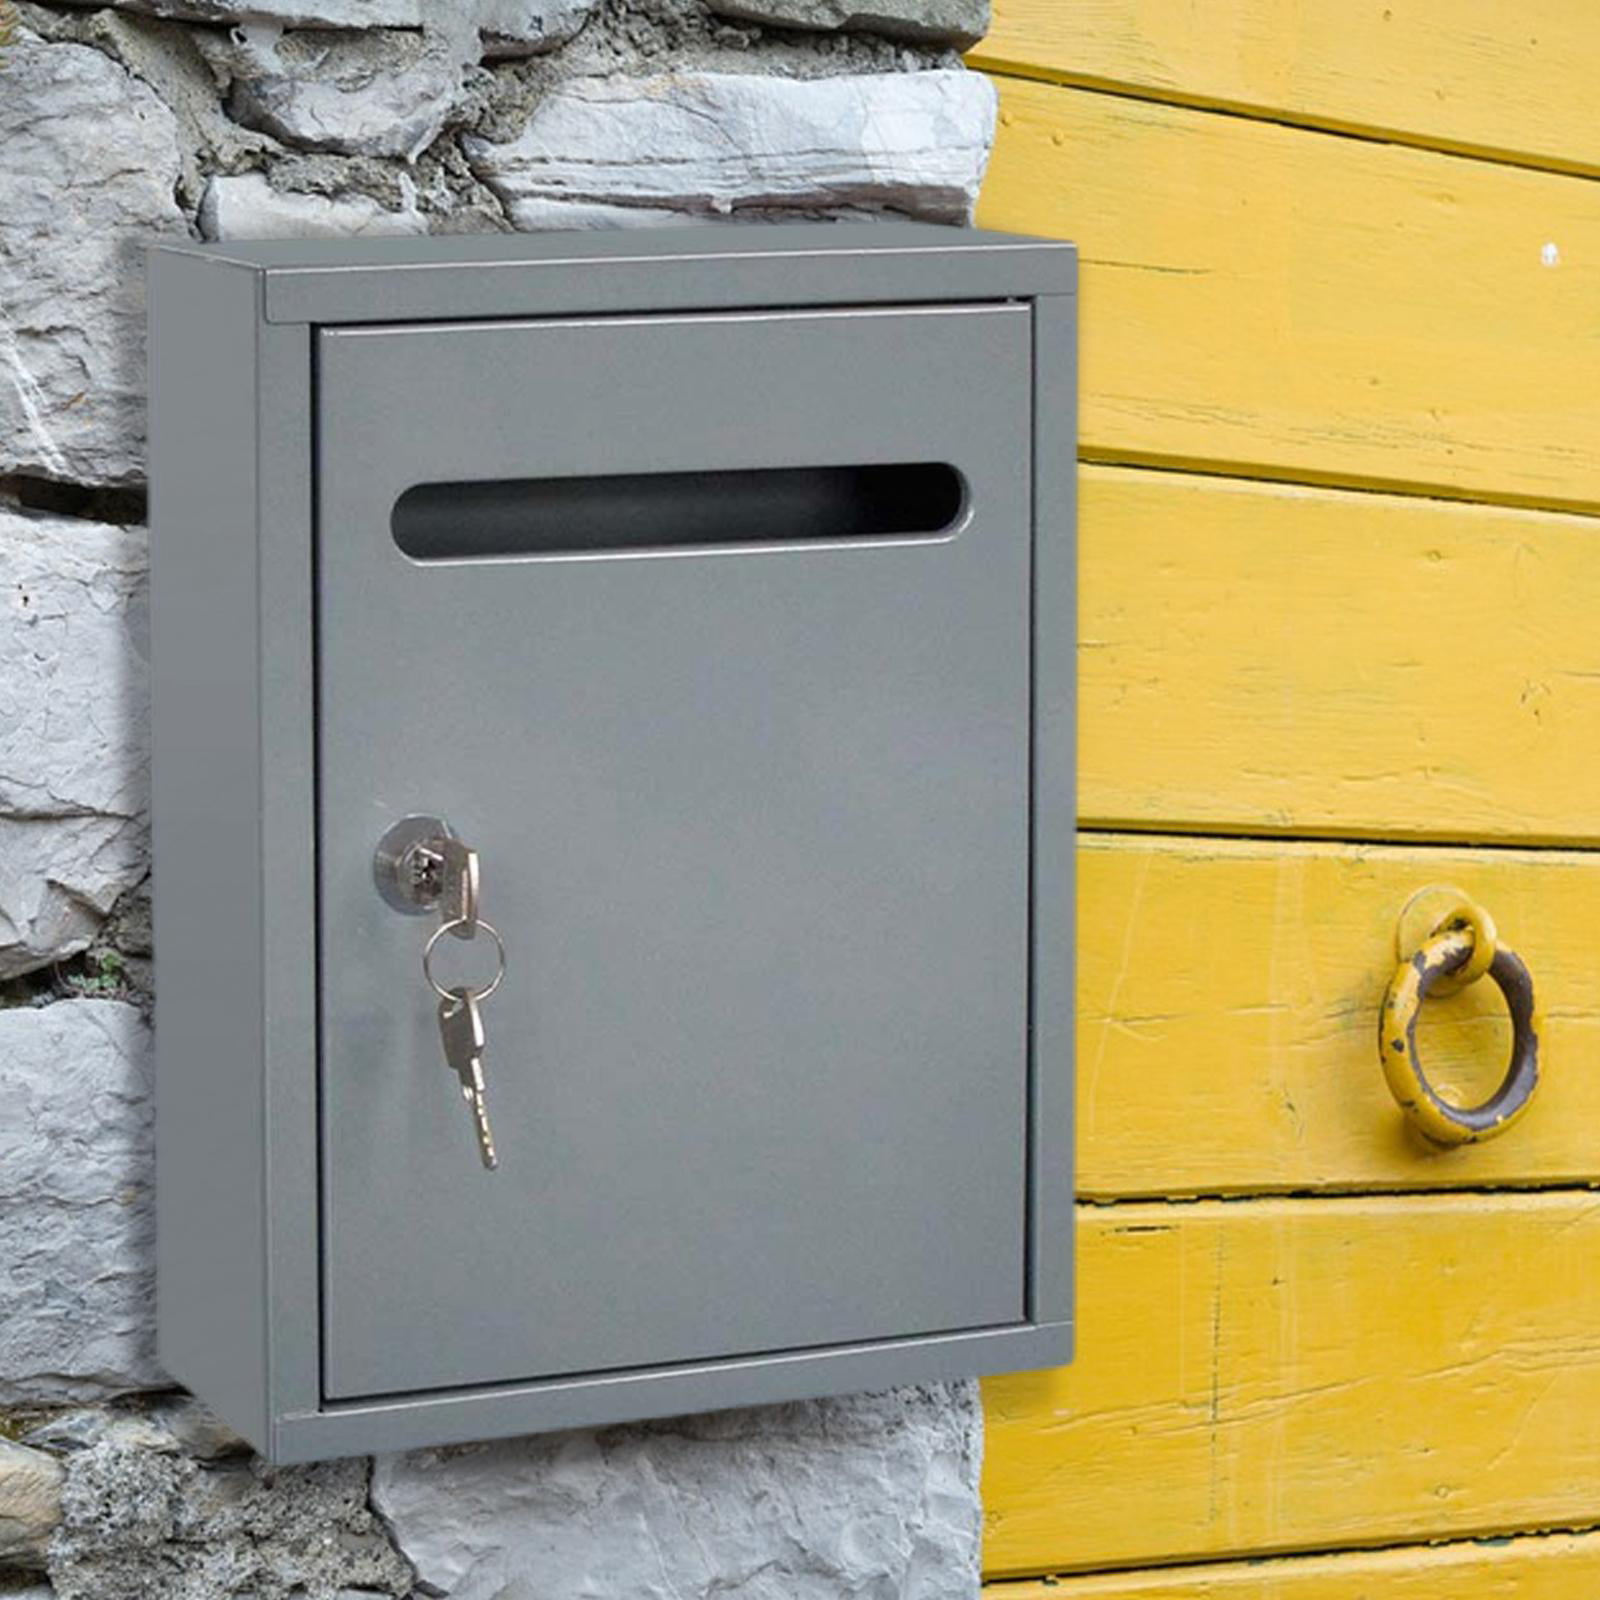 BLACK WALL MOUNTED LETTERBOX MAILBOX LOCKABLE LETTER MAIL POST BOX 2 KEYS 